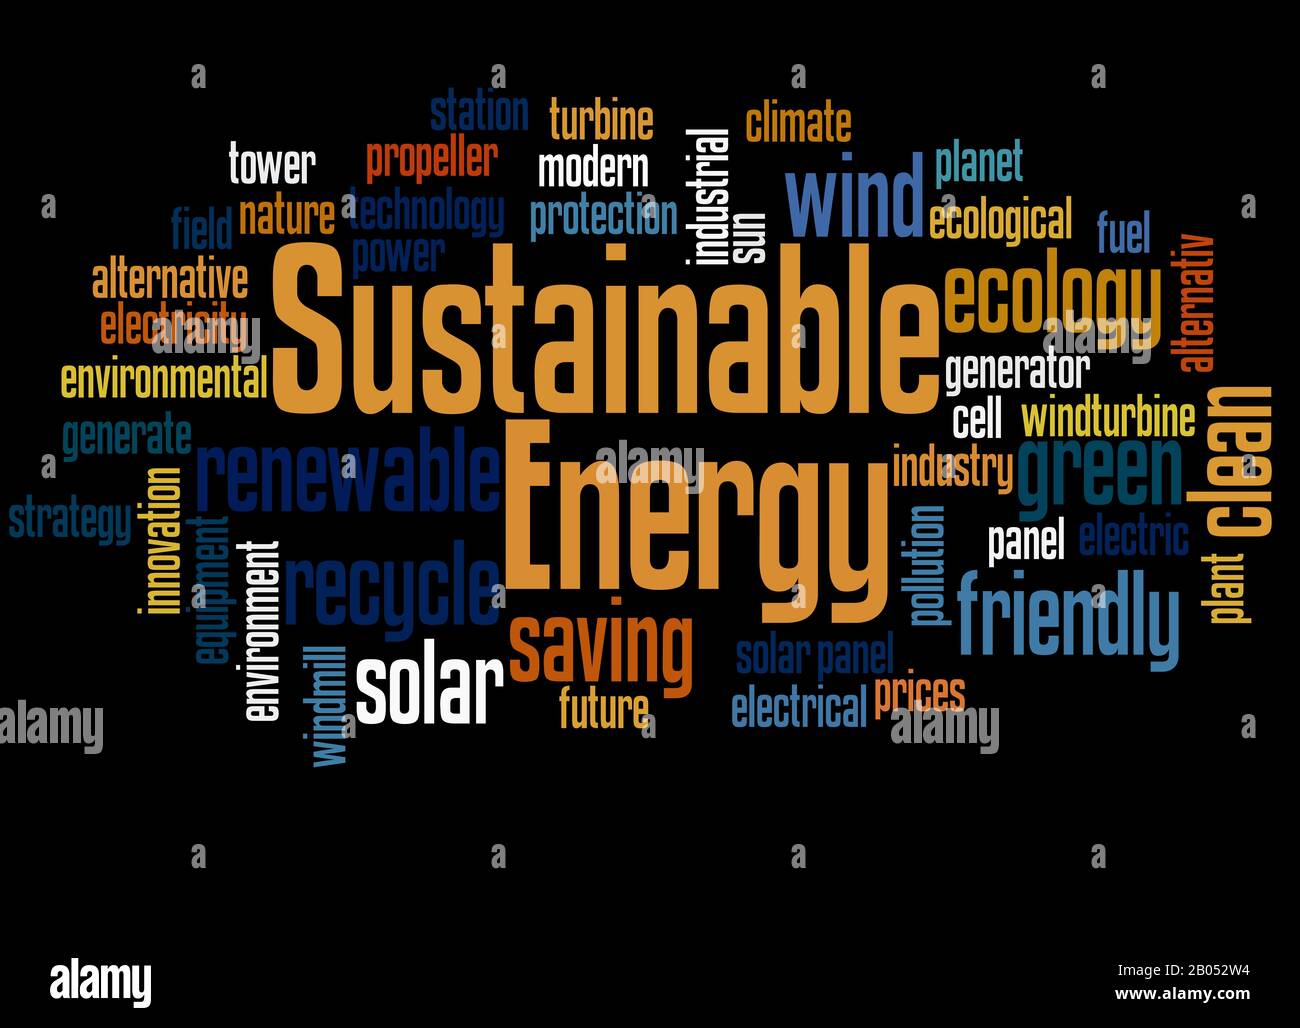 Sustainable energy word cloud concept on black background. Stock Photo